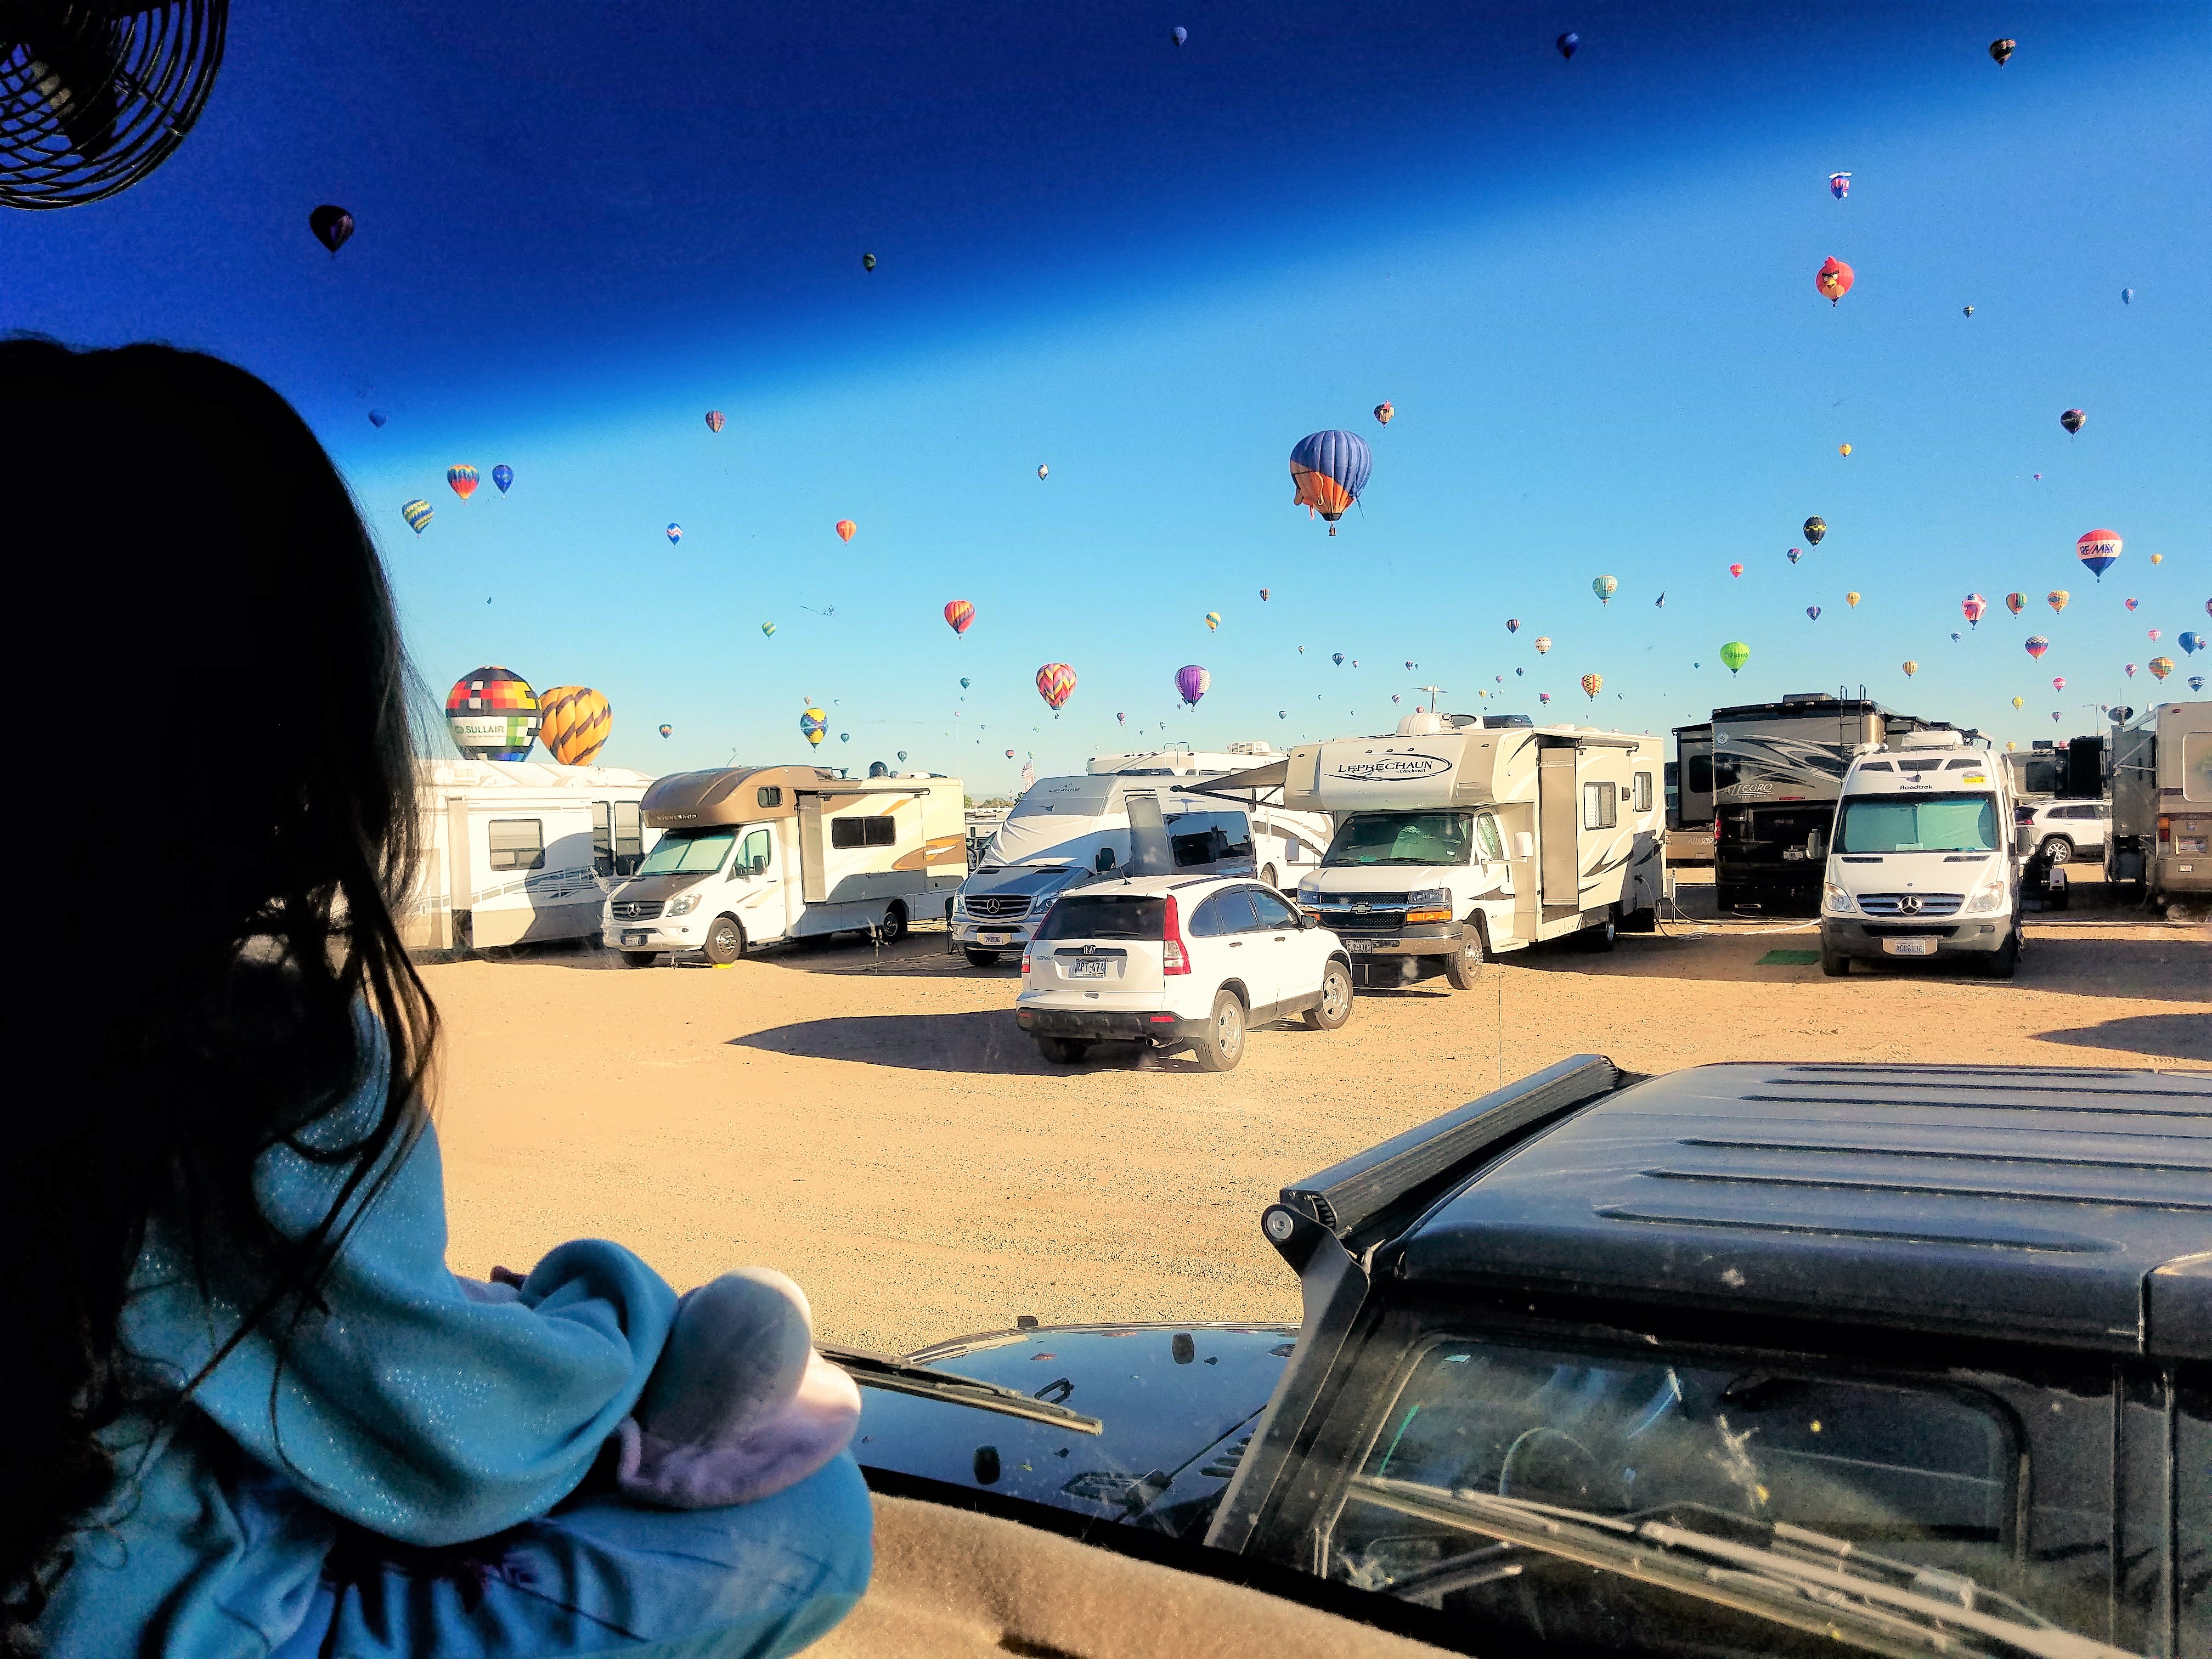 Hot air balloons fill the sky above RVs.